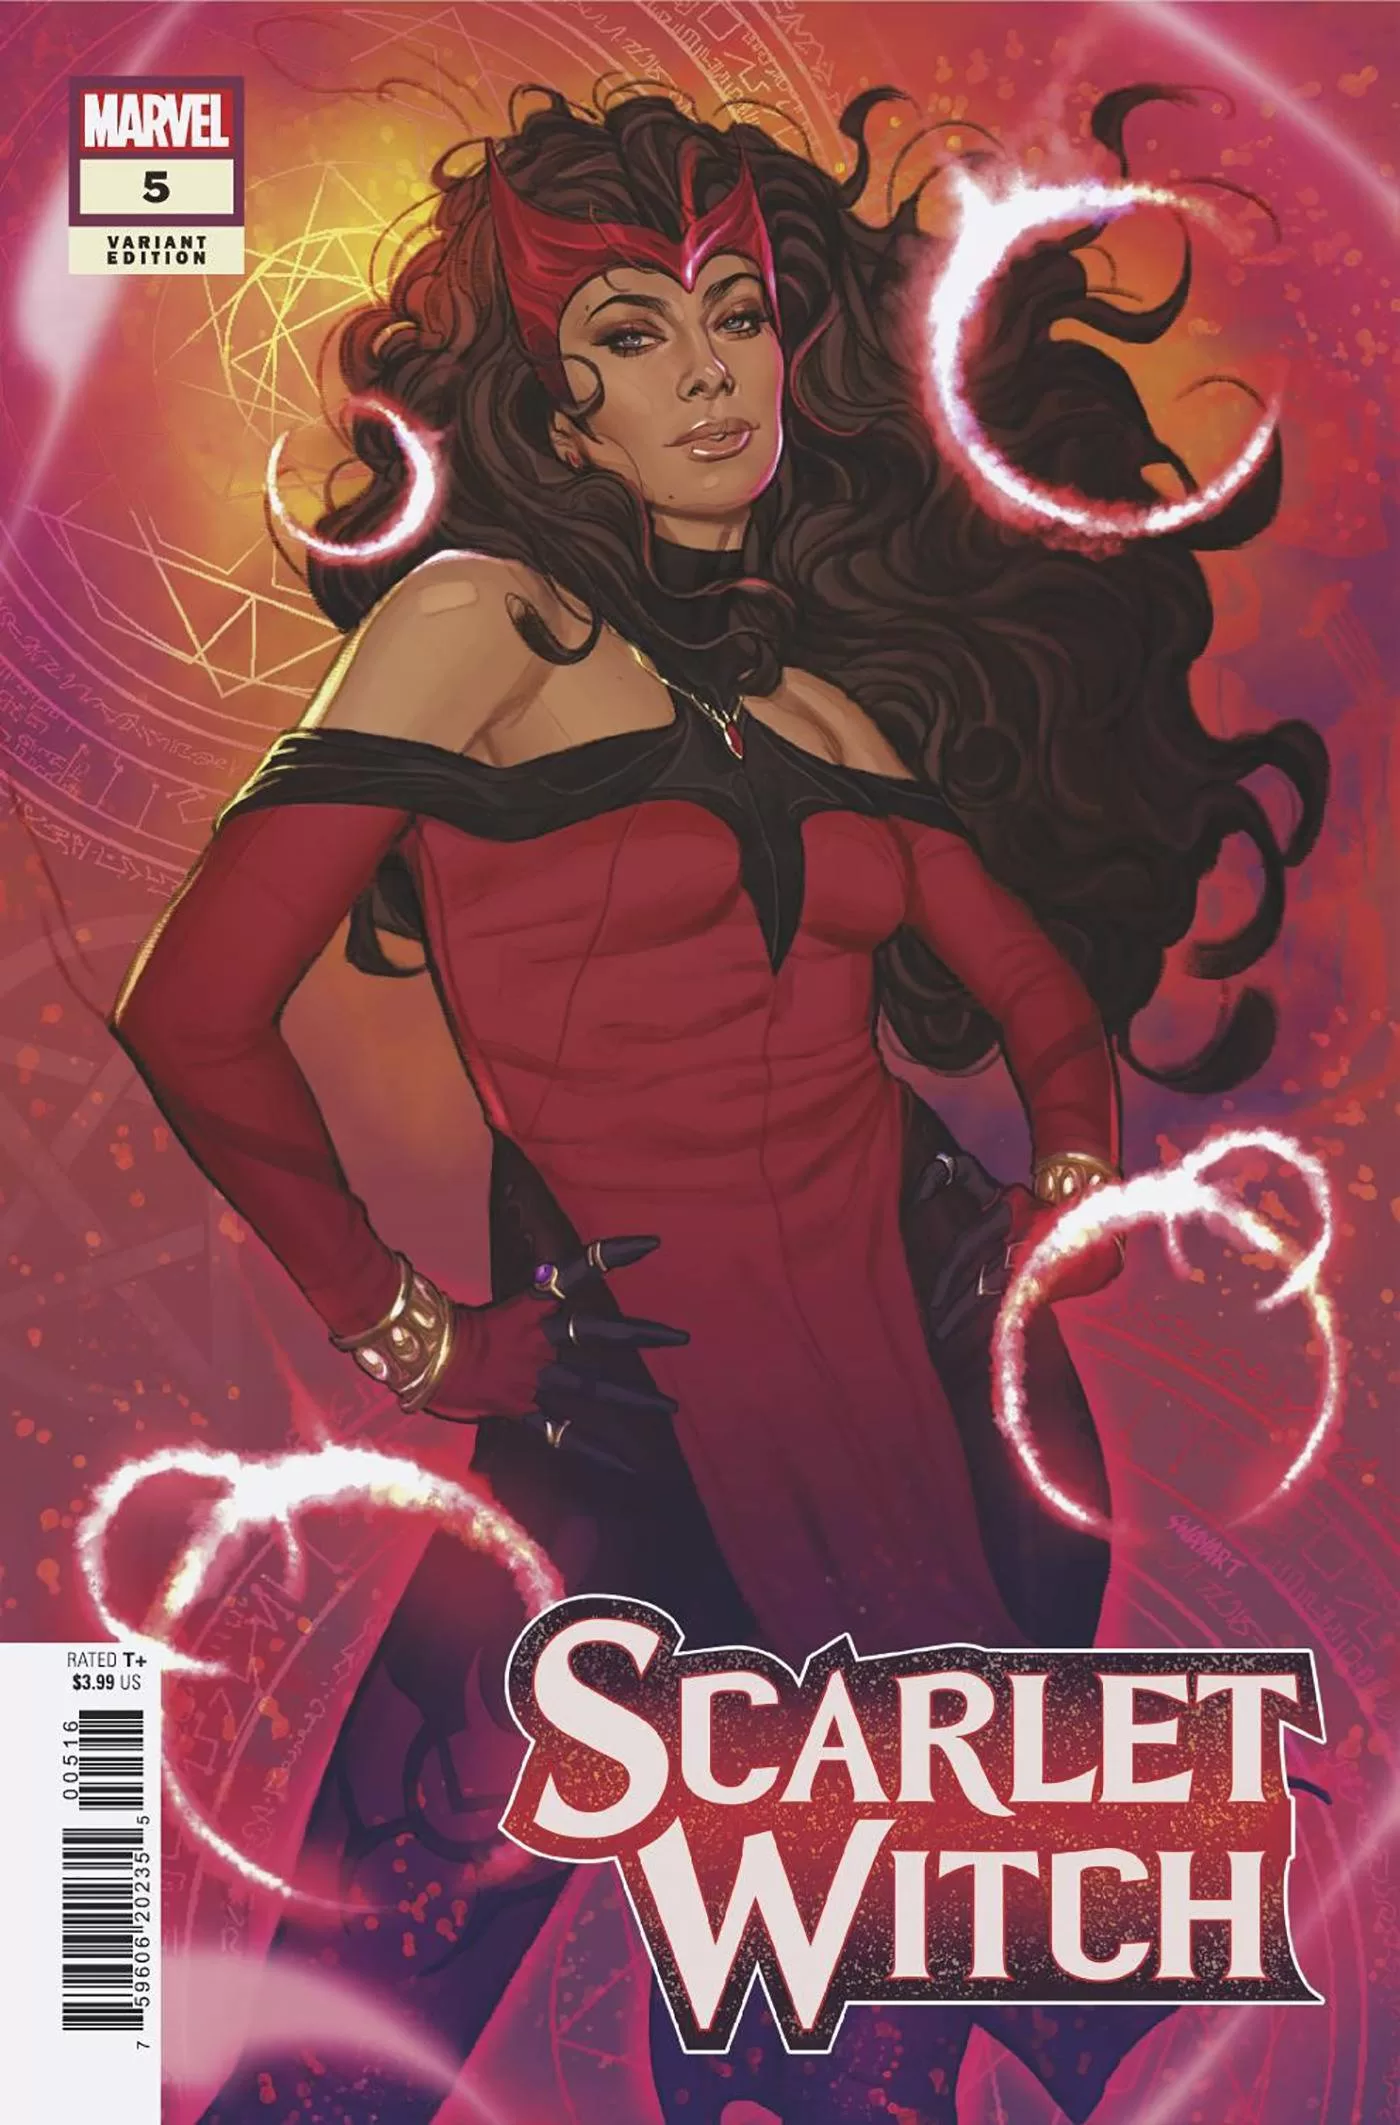 Marvel's Scarlet Witch Is Cancelled, But Not As We Know It